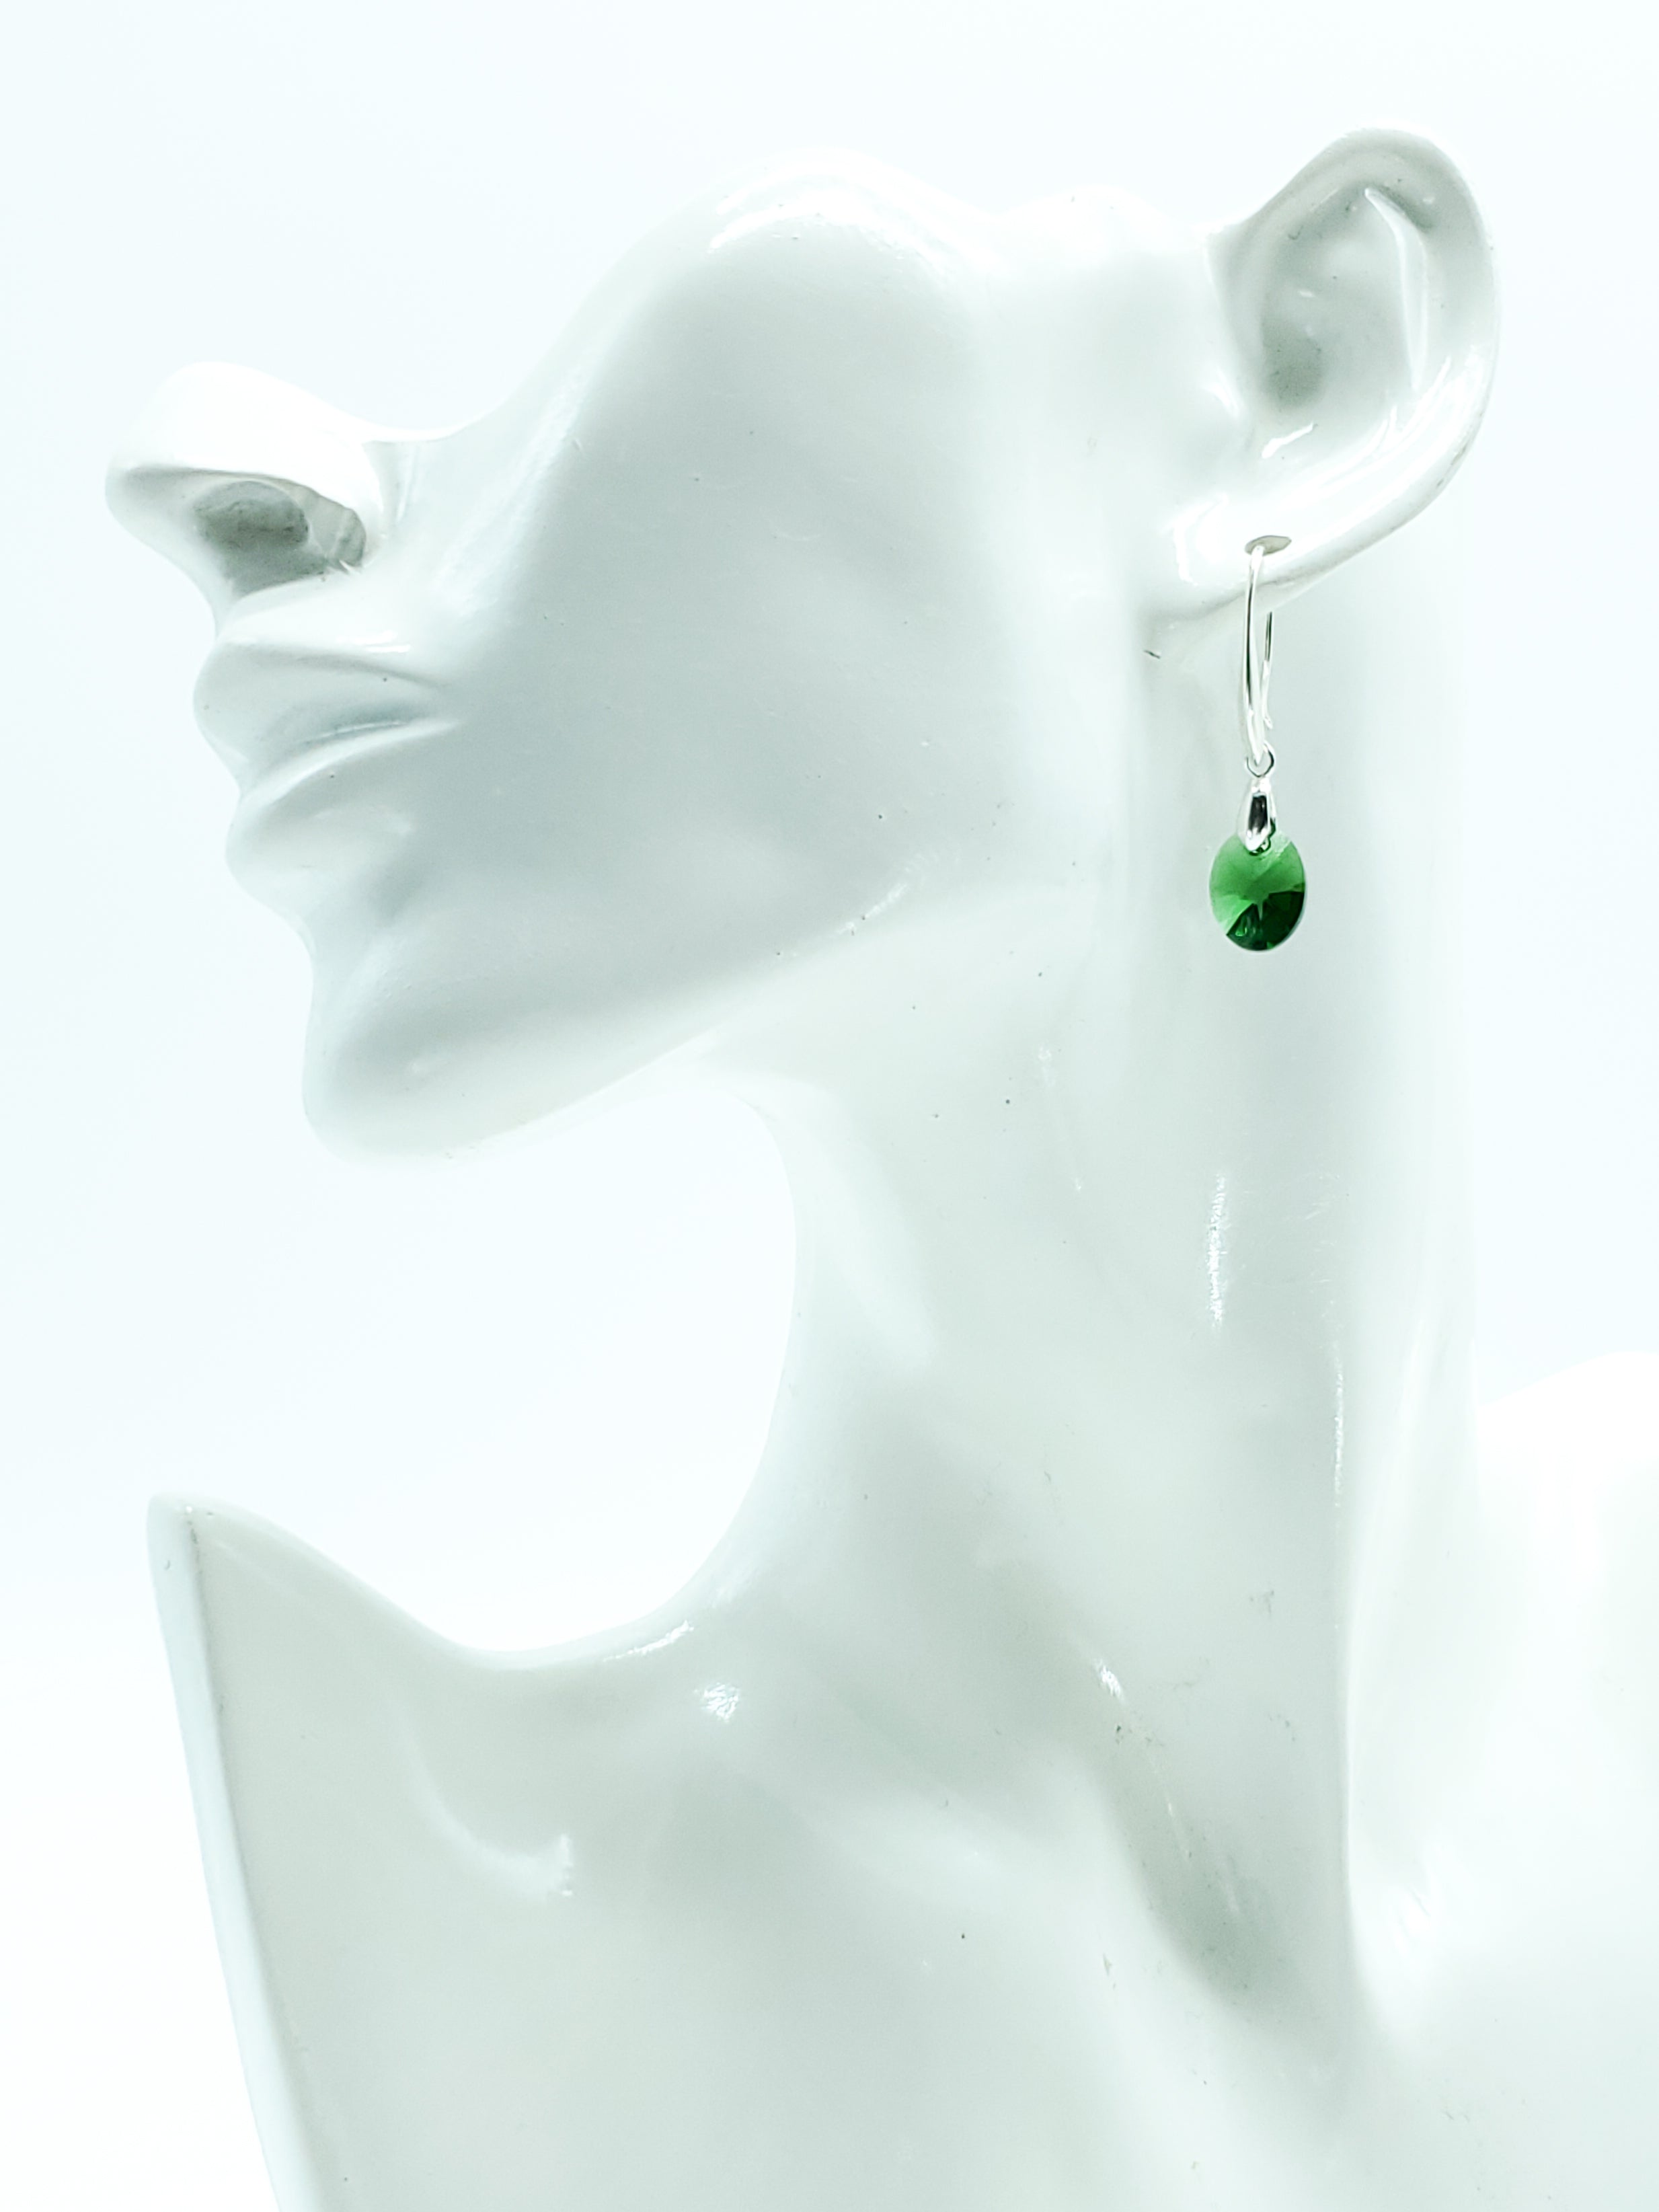 "Emerald" OVAL SWAROVSKI CRYSTAL/STERLING SILVER EARRINGS - The Caffeinated Raven